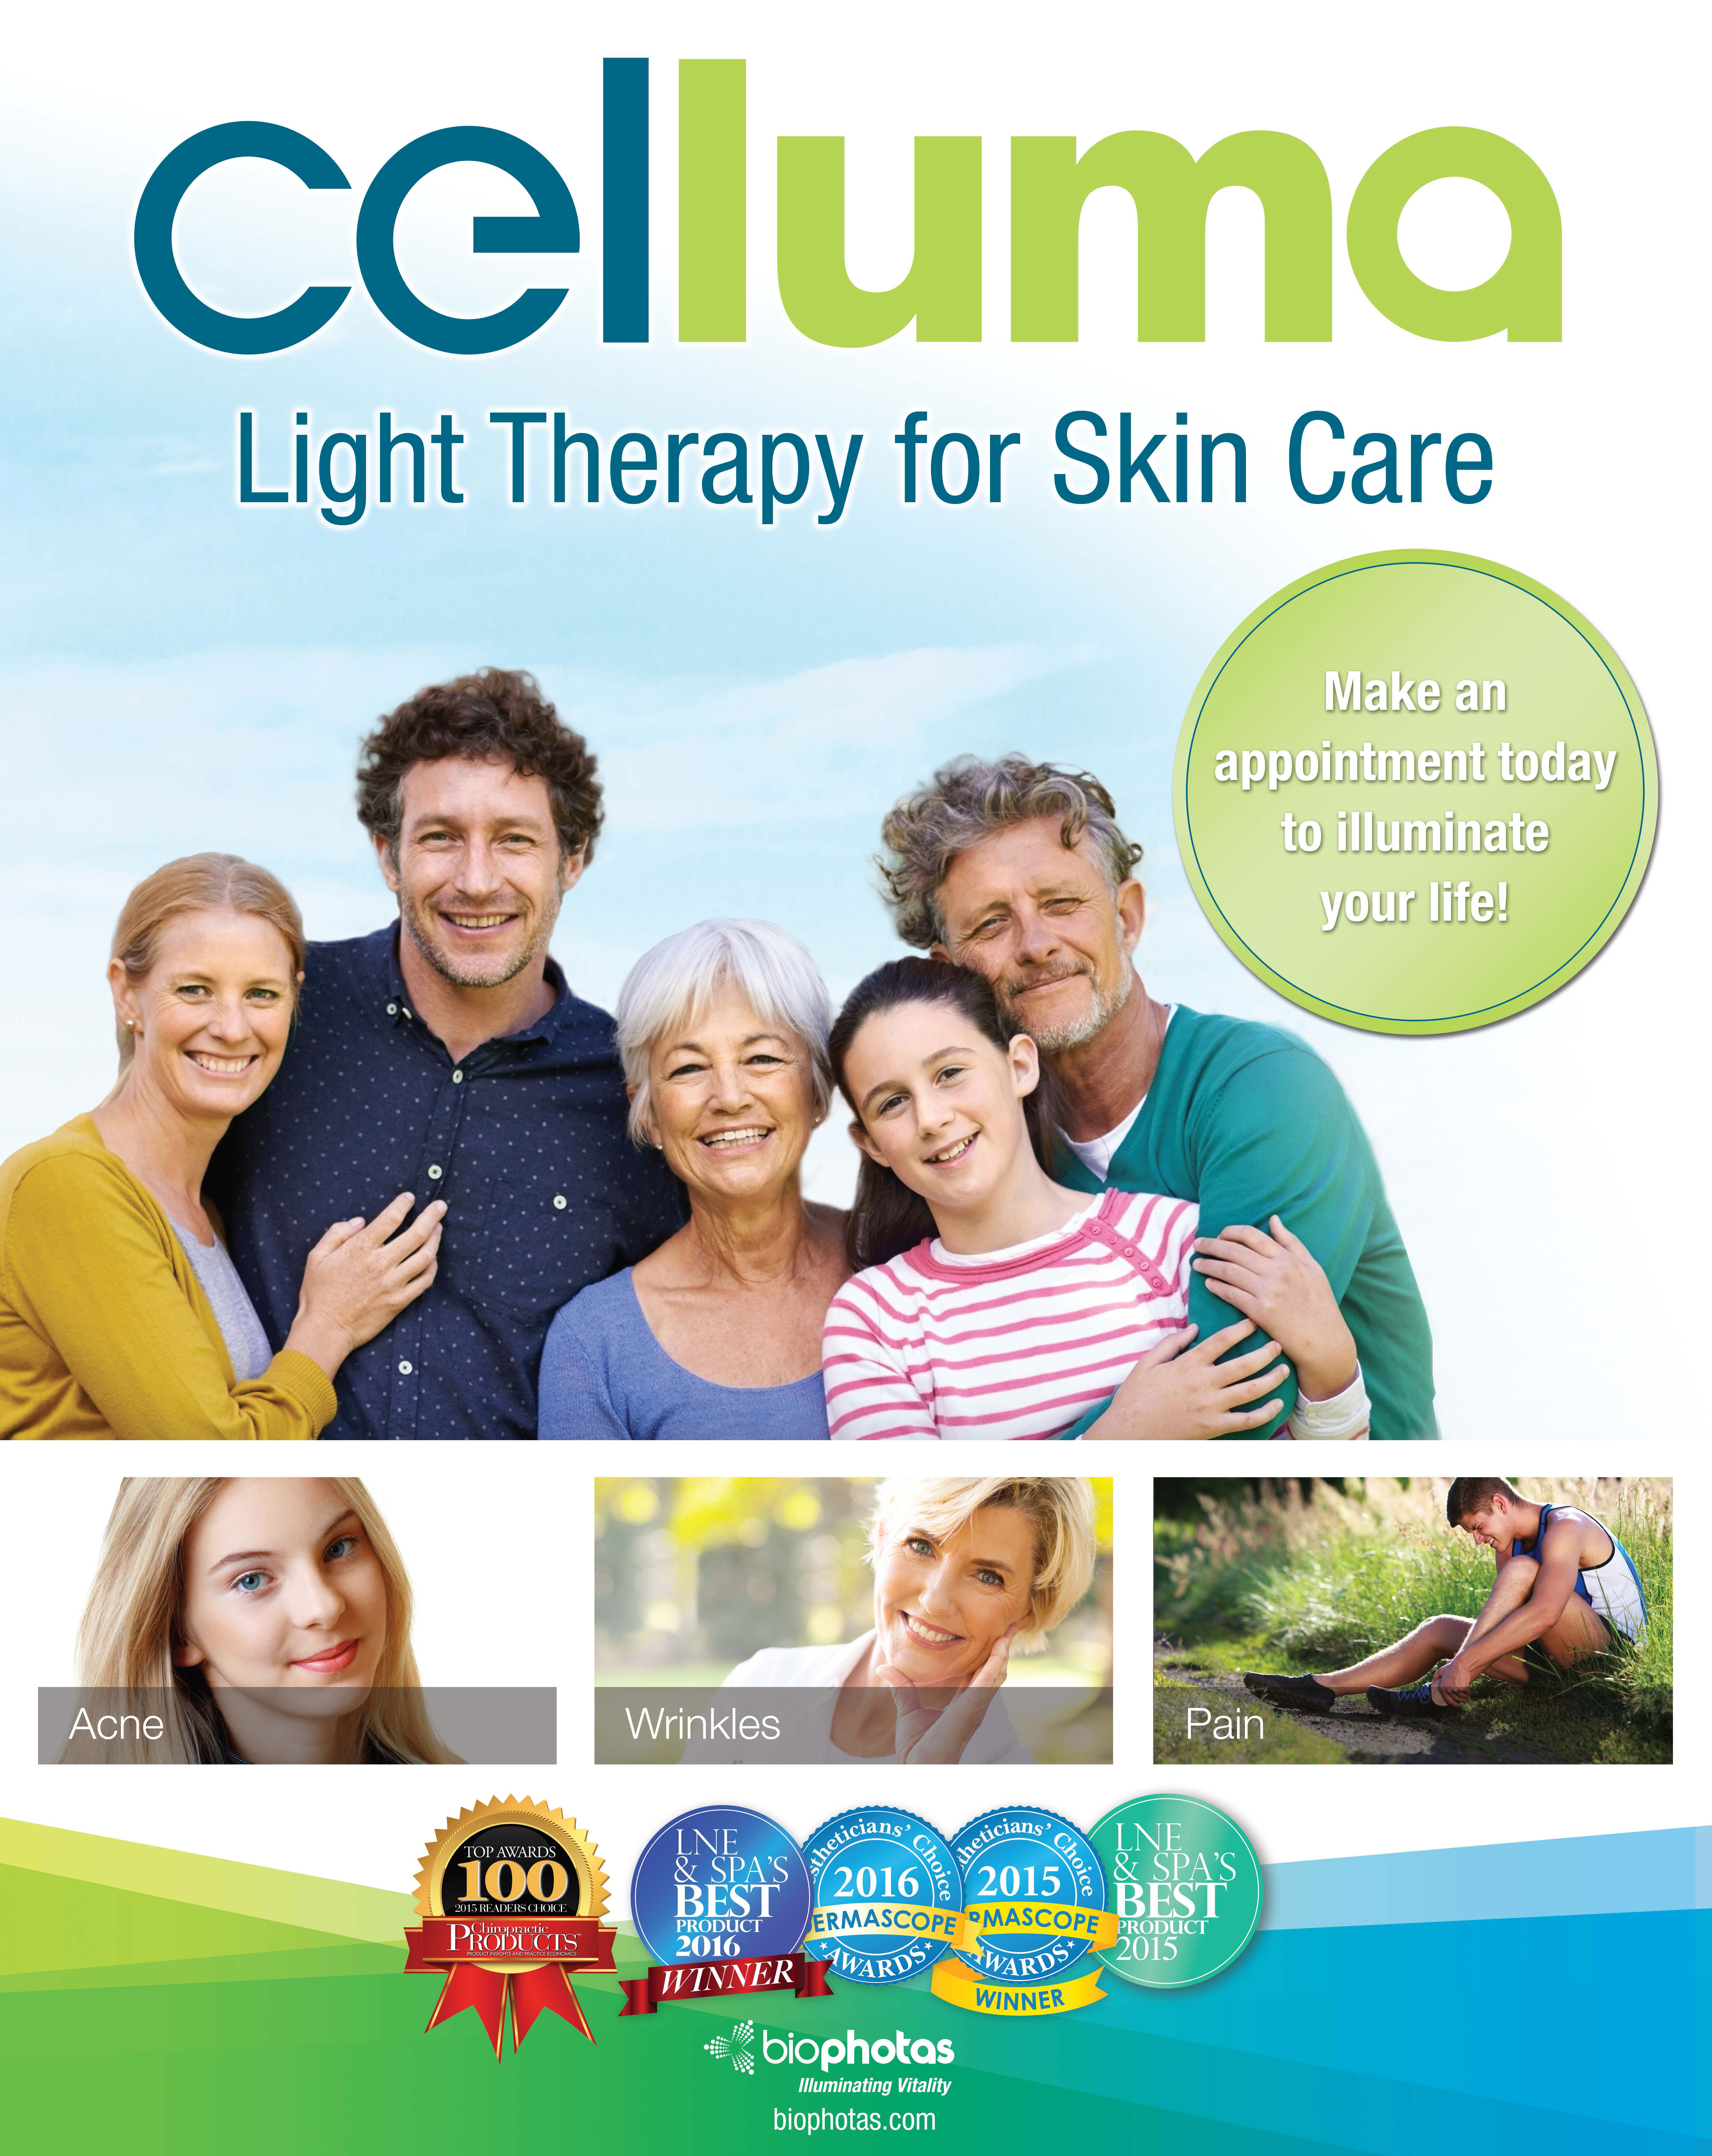 740YCryo What Is Celluma